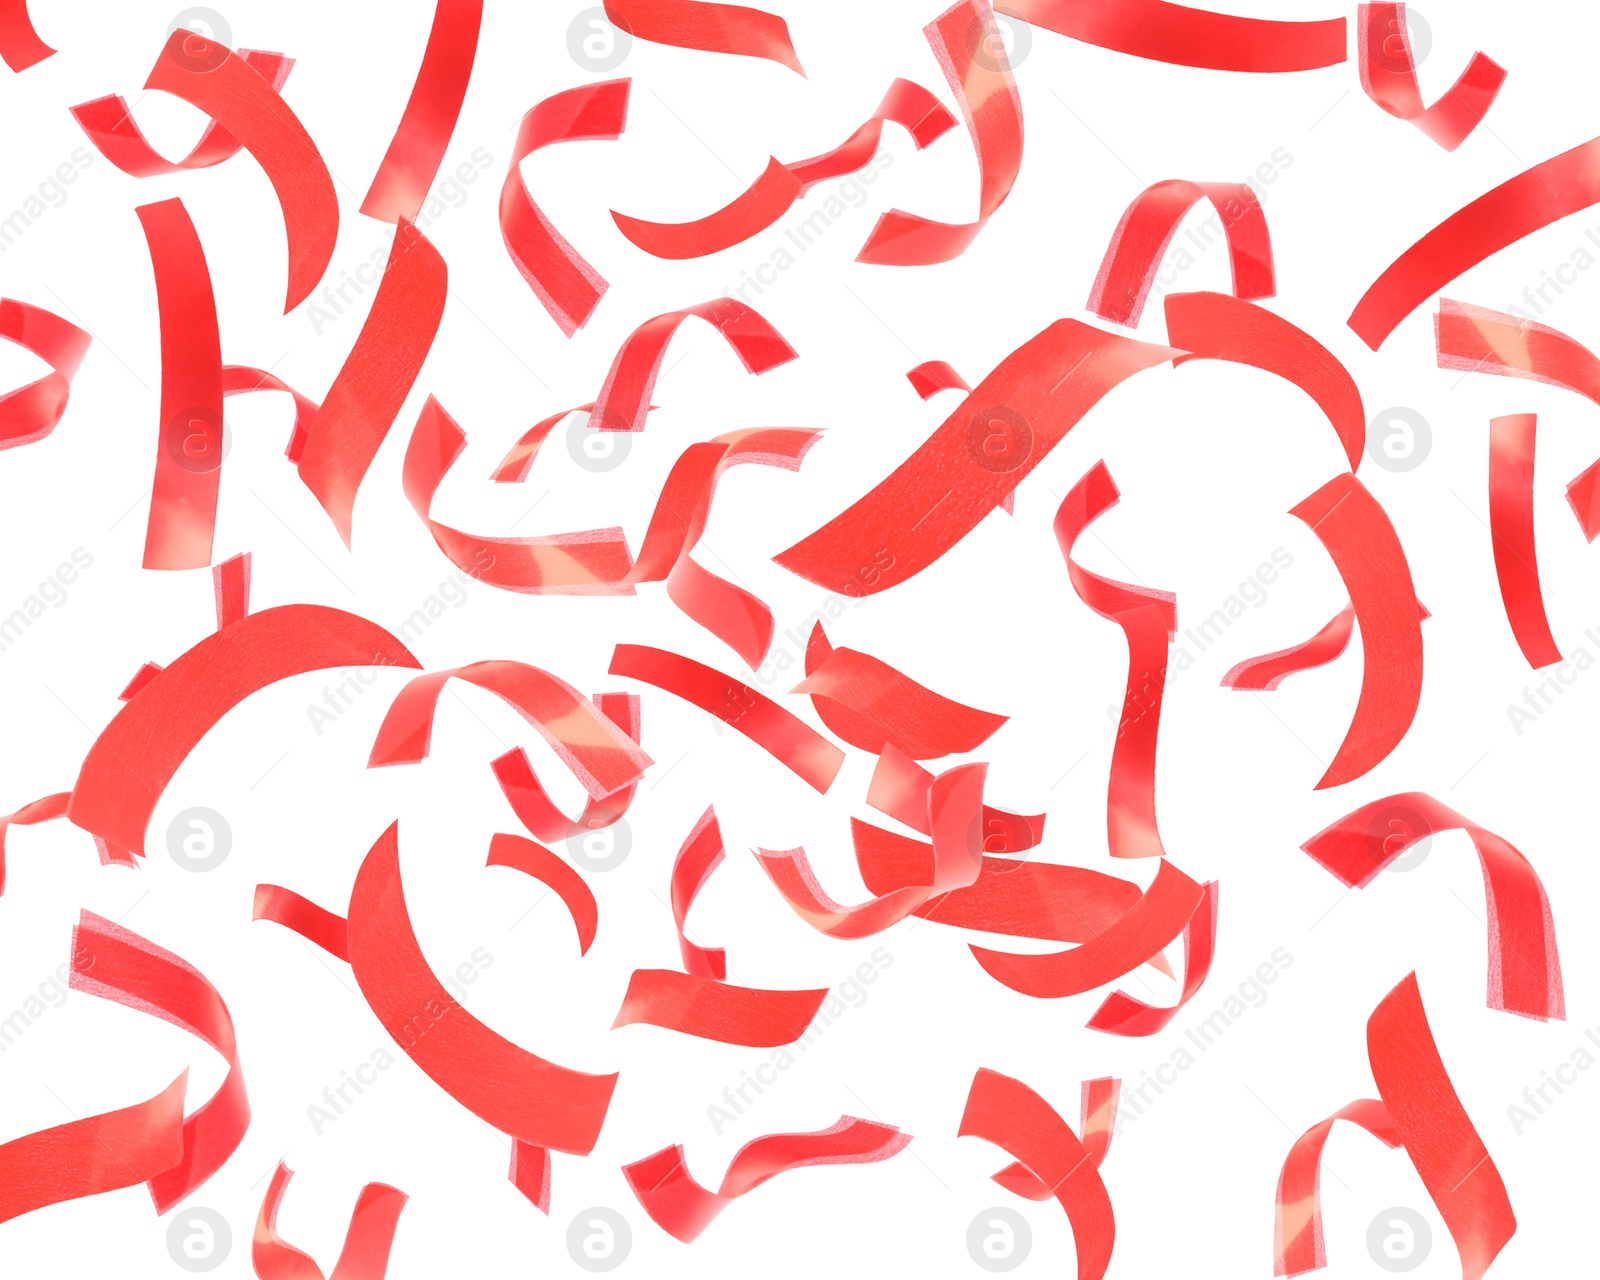 Image of Bright red confetti falling on white background